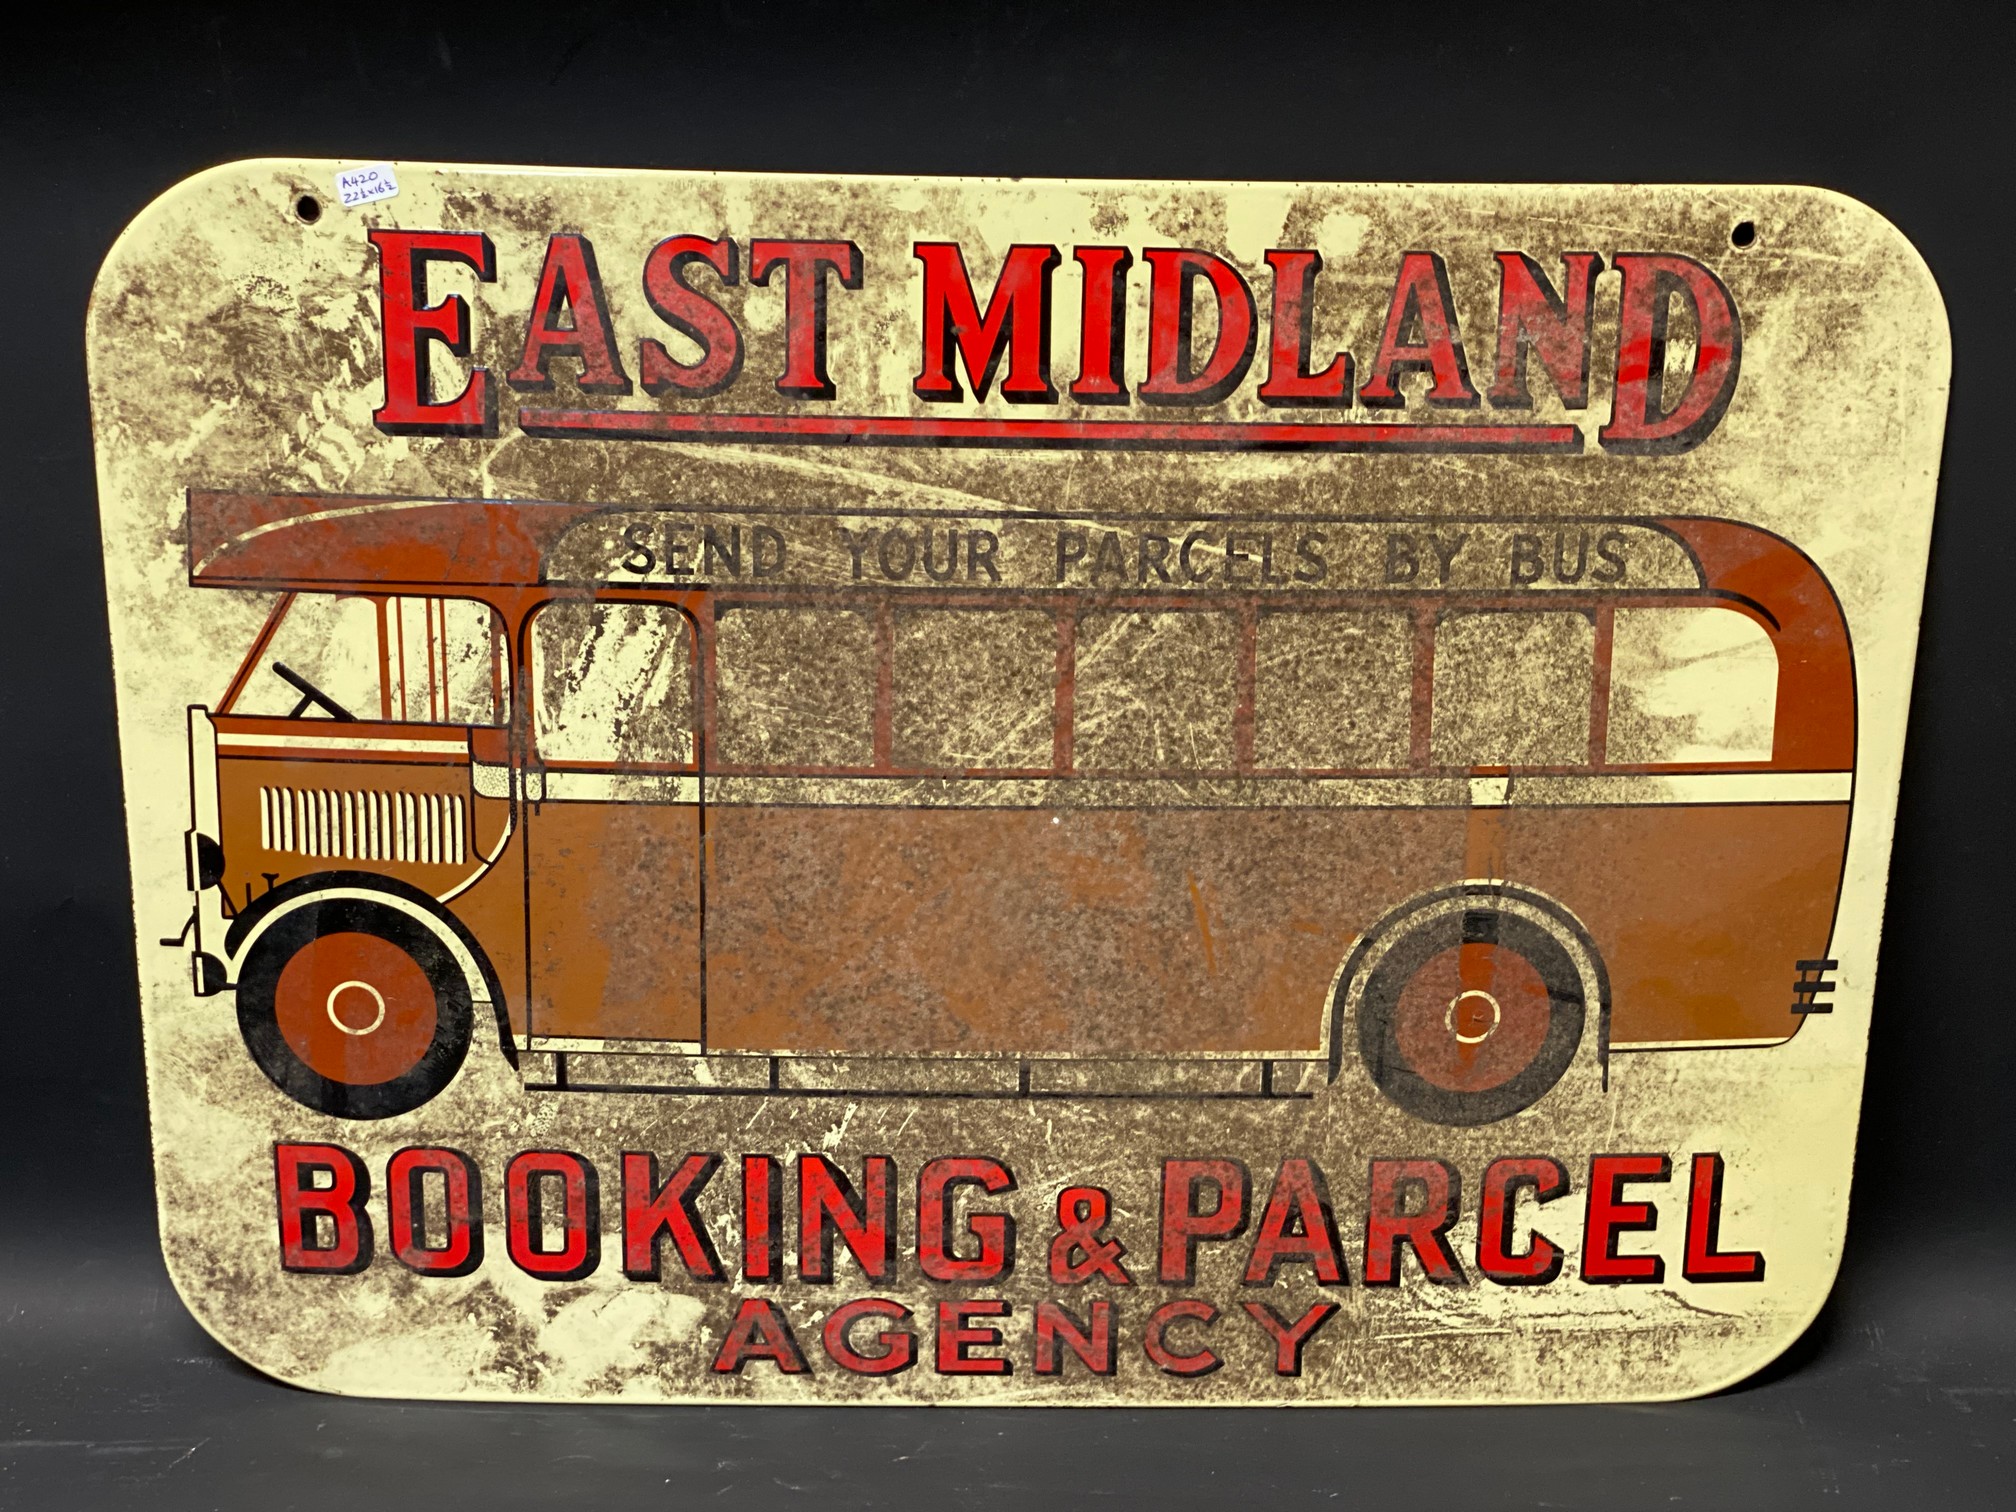 An East Midland Booking and Parcel Agency pictorial double sided enamel sign depicting a vintage bus - Image 4 of 4